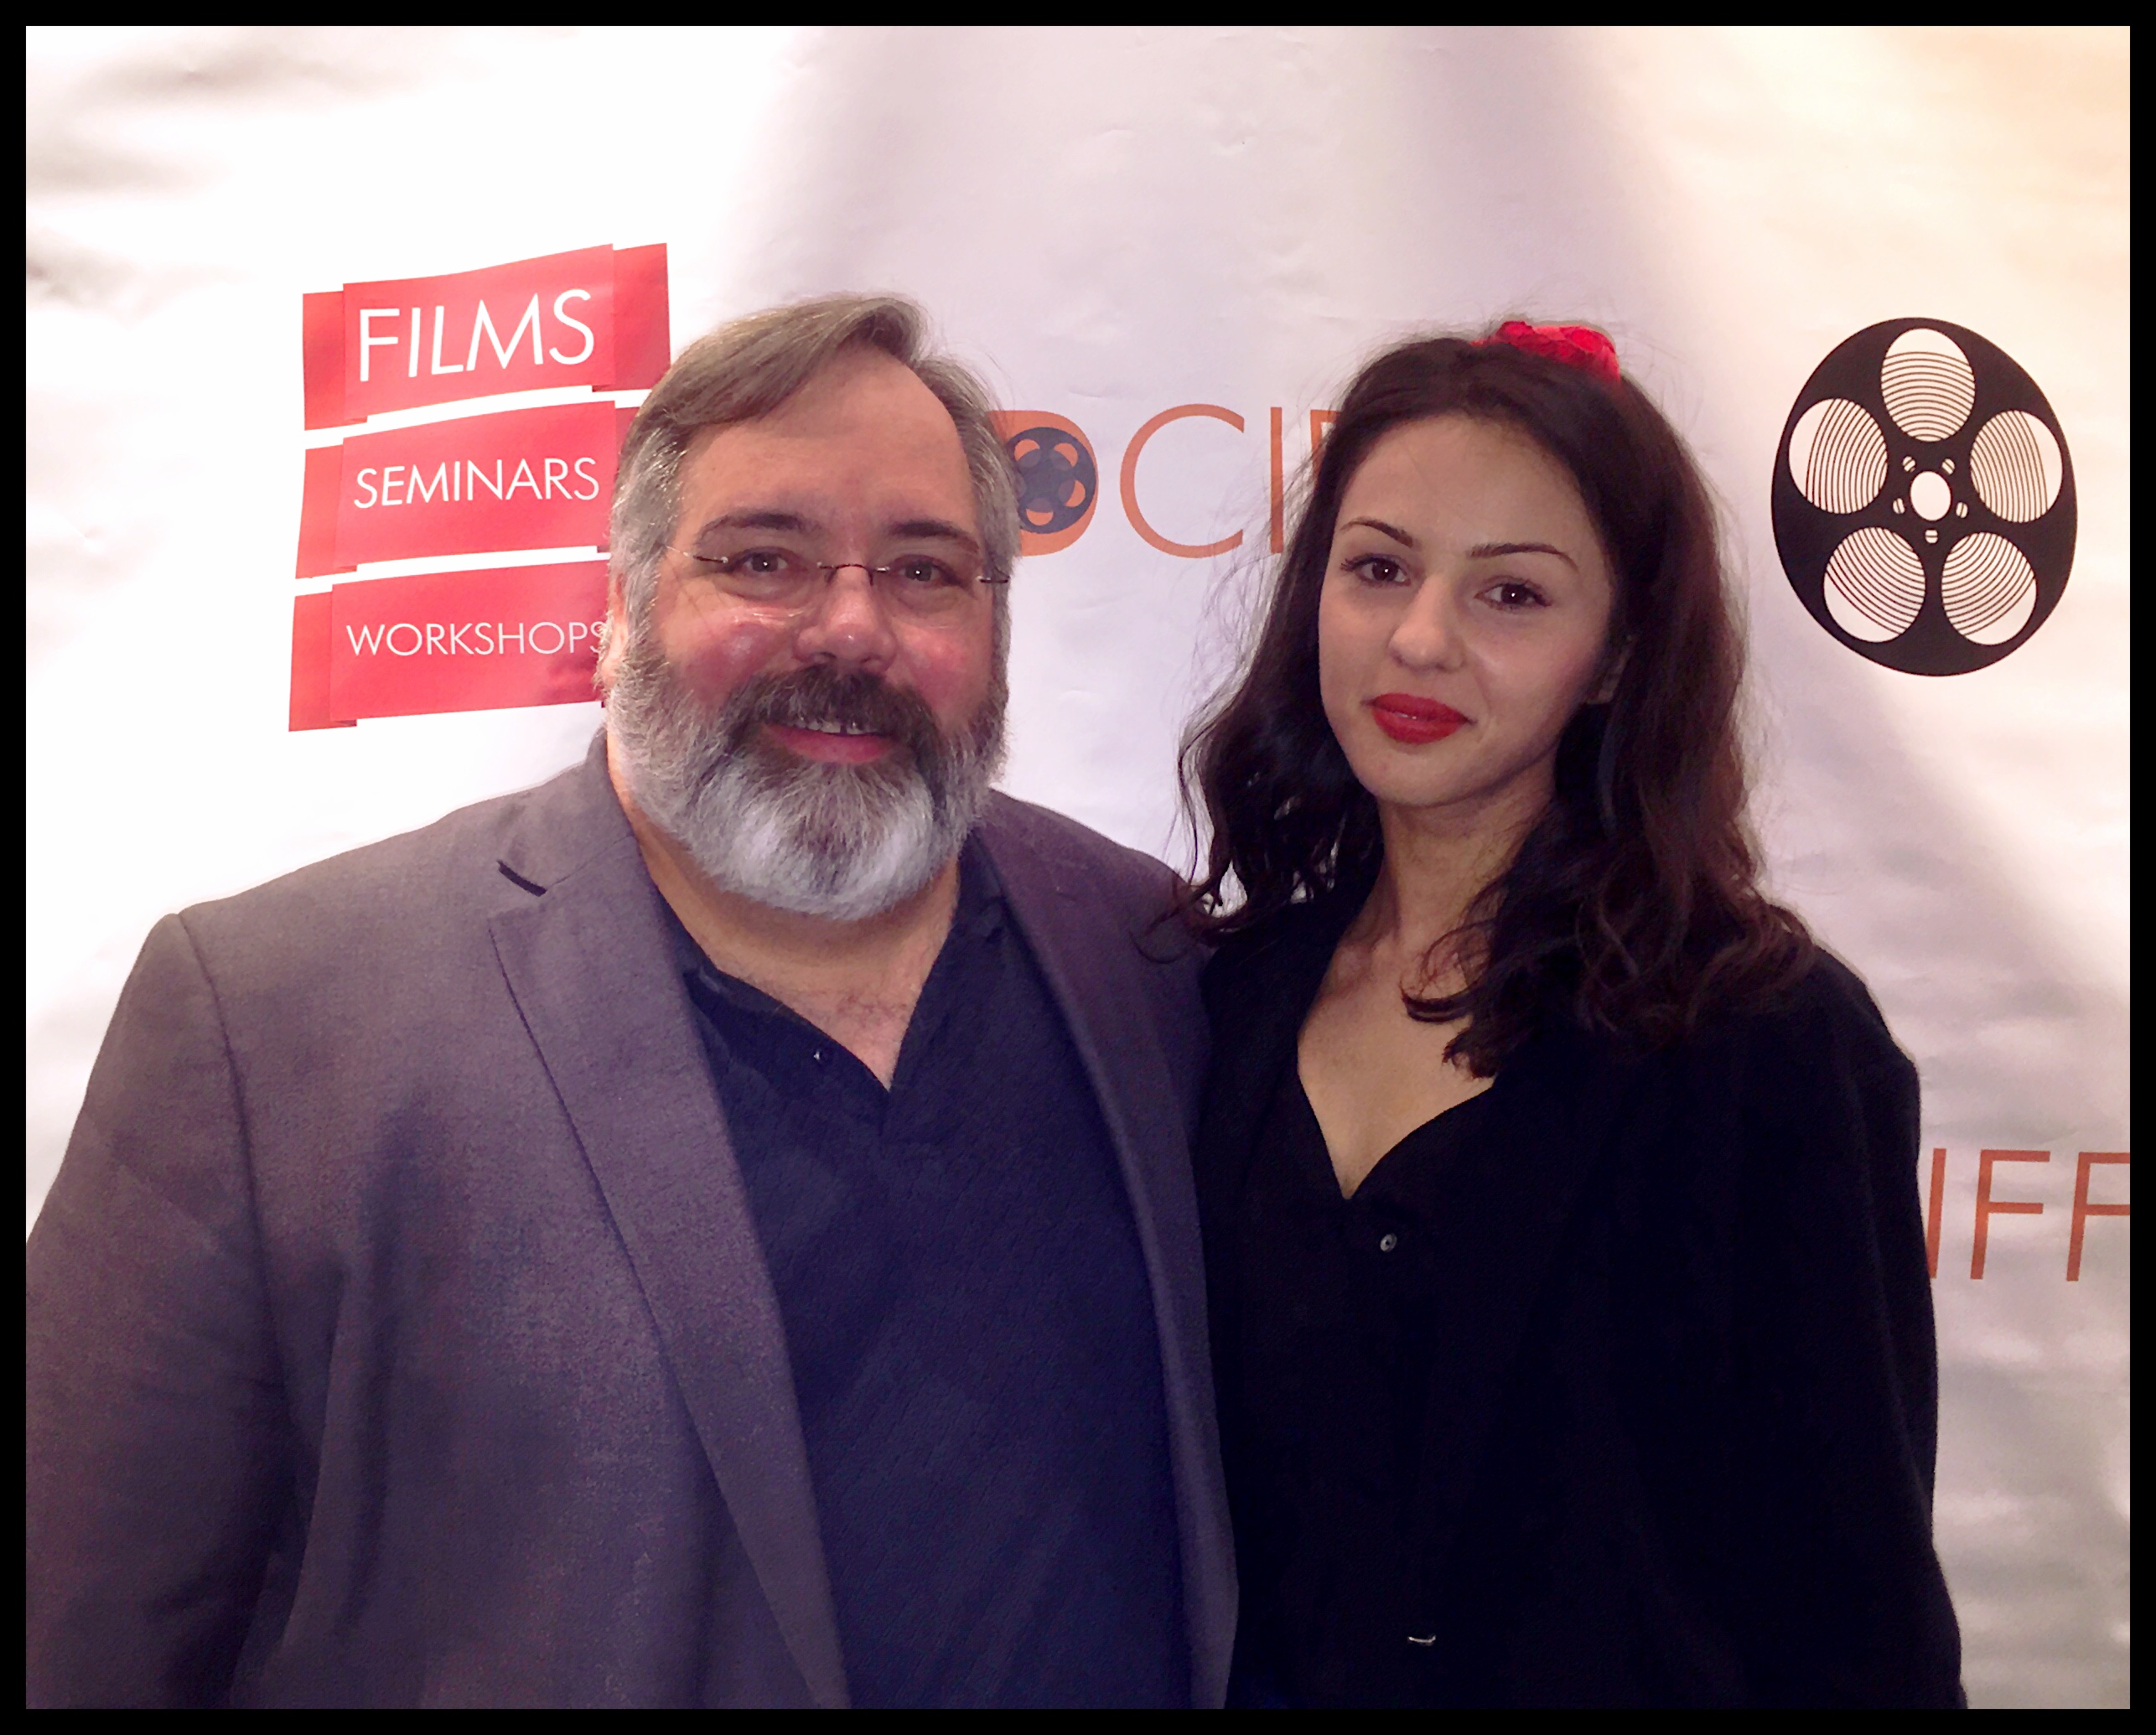 Sally Pacholok Premiere at 2014 DC Film Festival. Wes Johnson and Annet Mahendru.